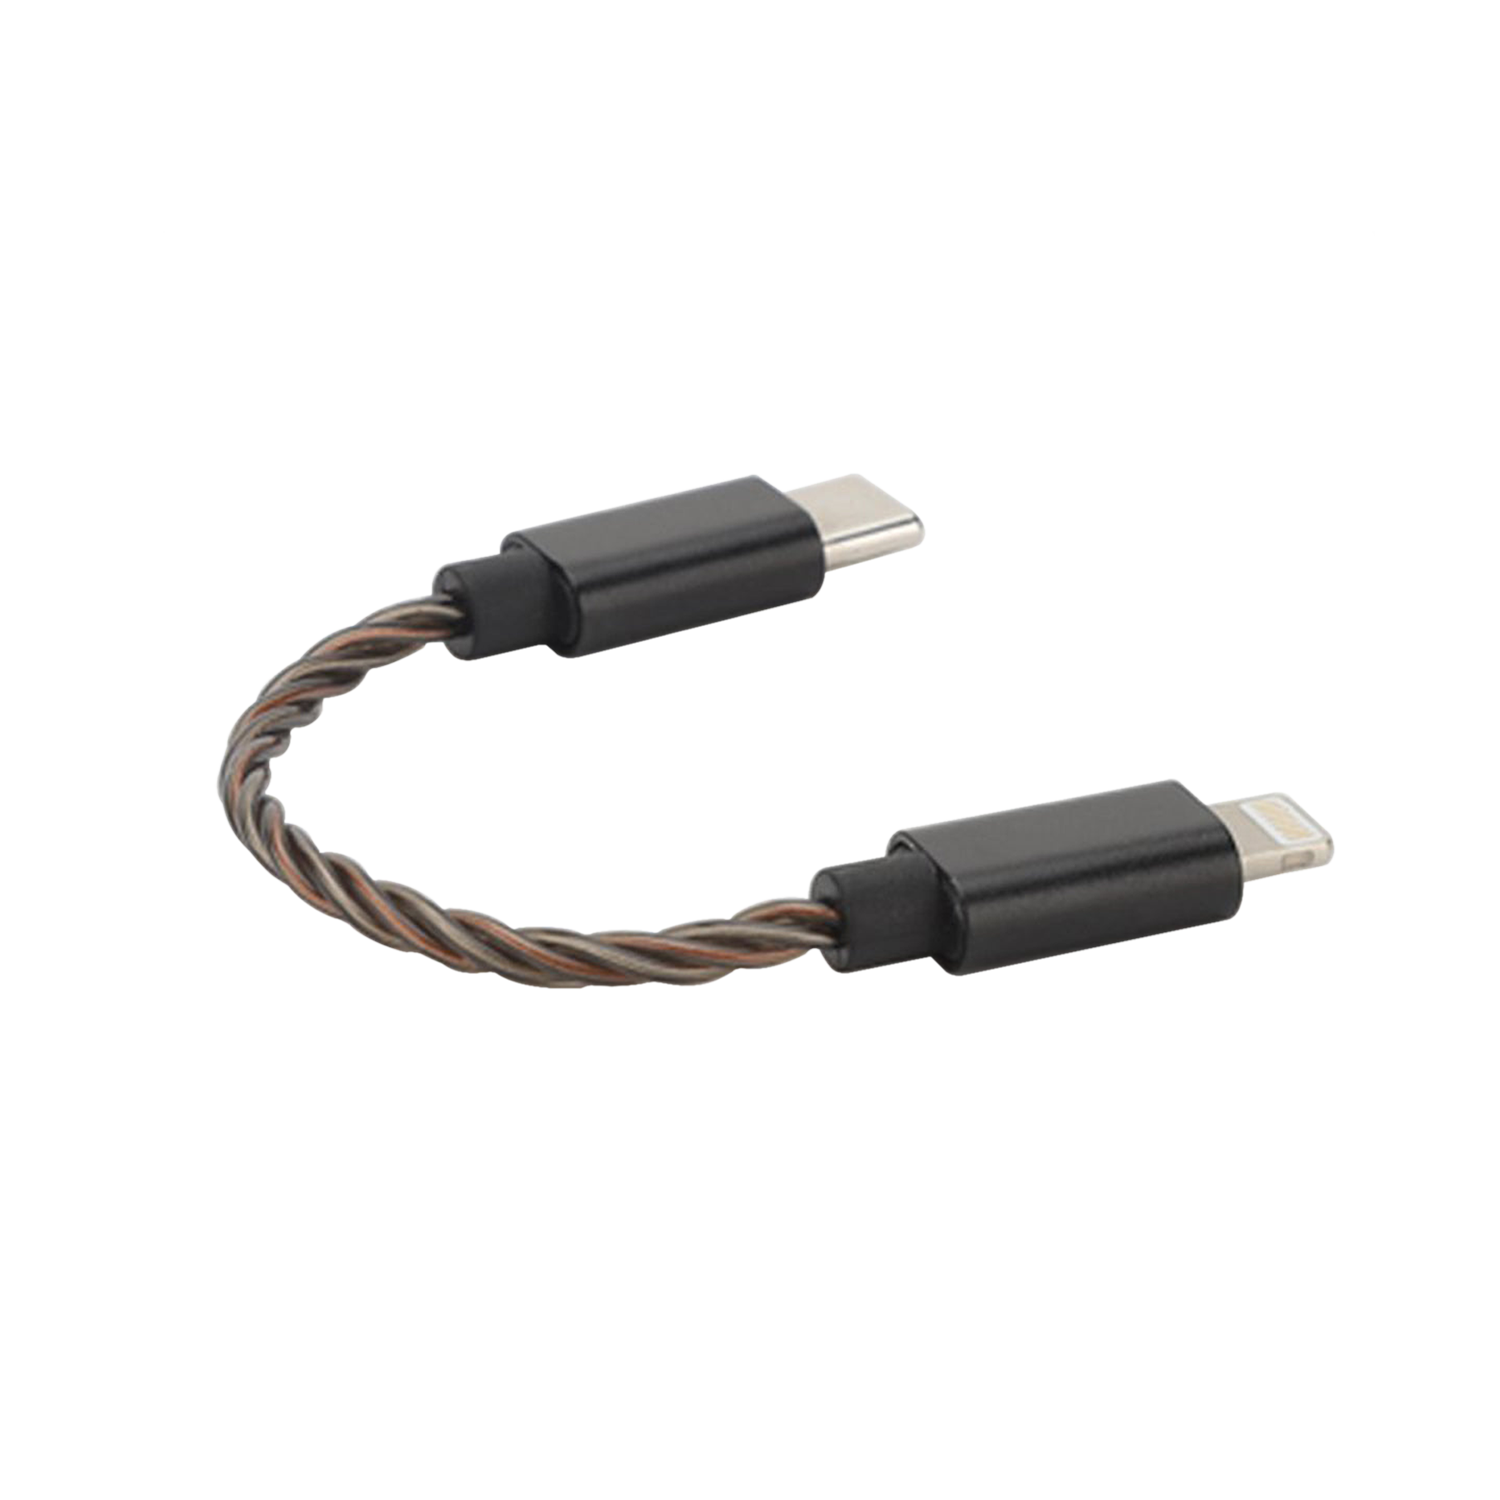 Hidizs LT02 USB-C to Lightning Cable